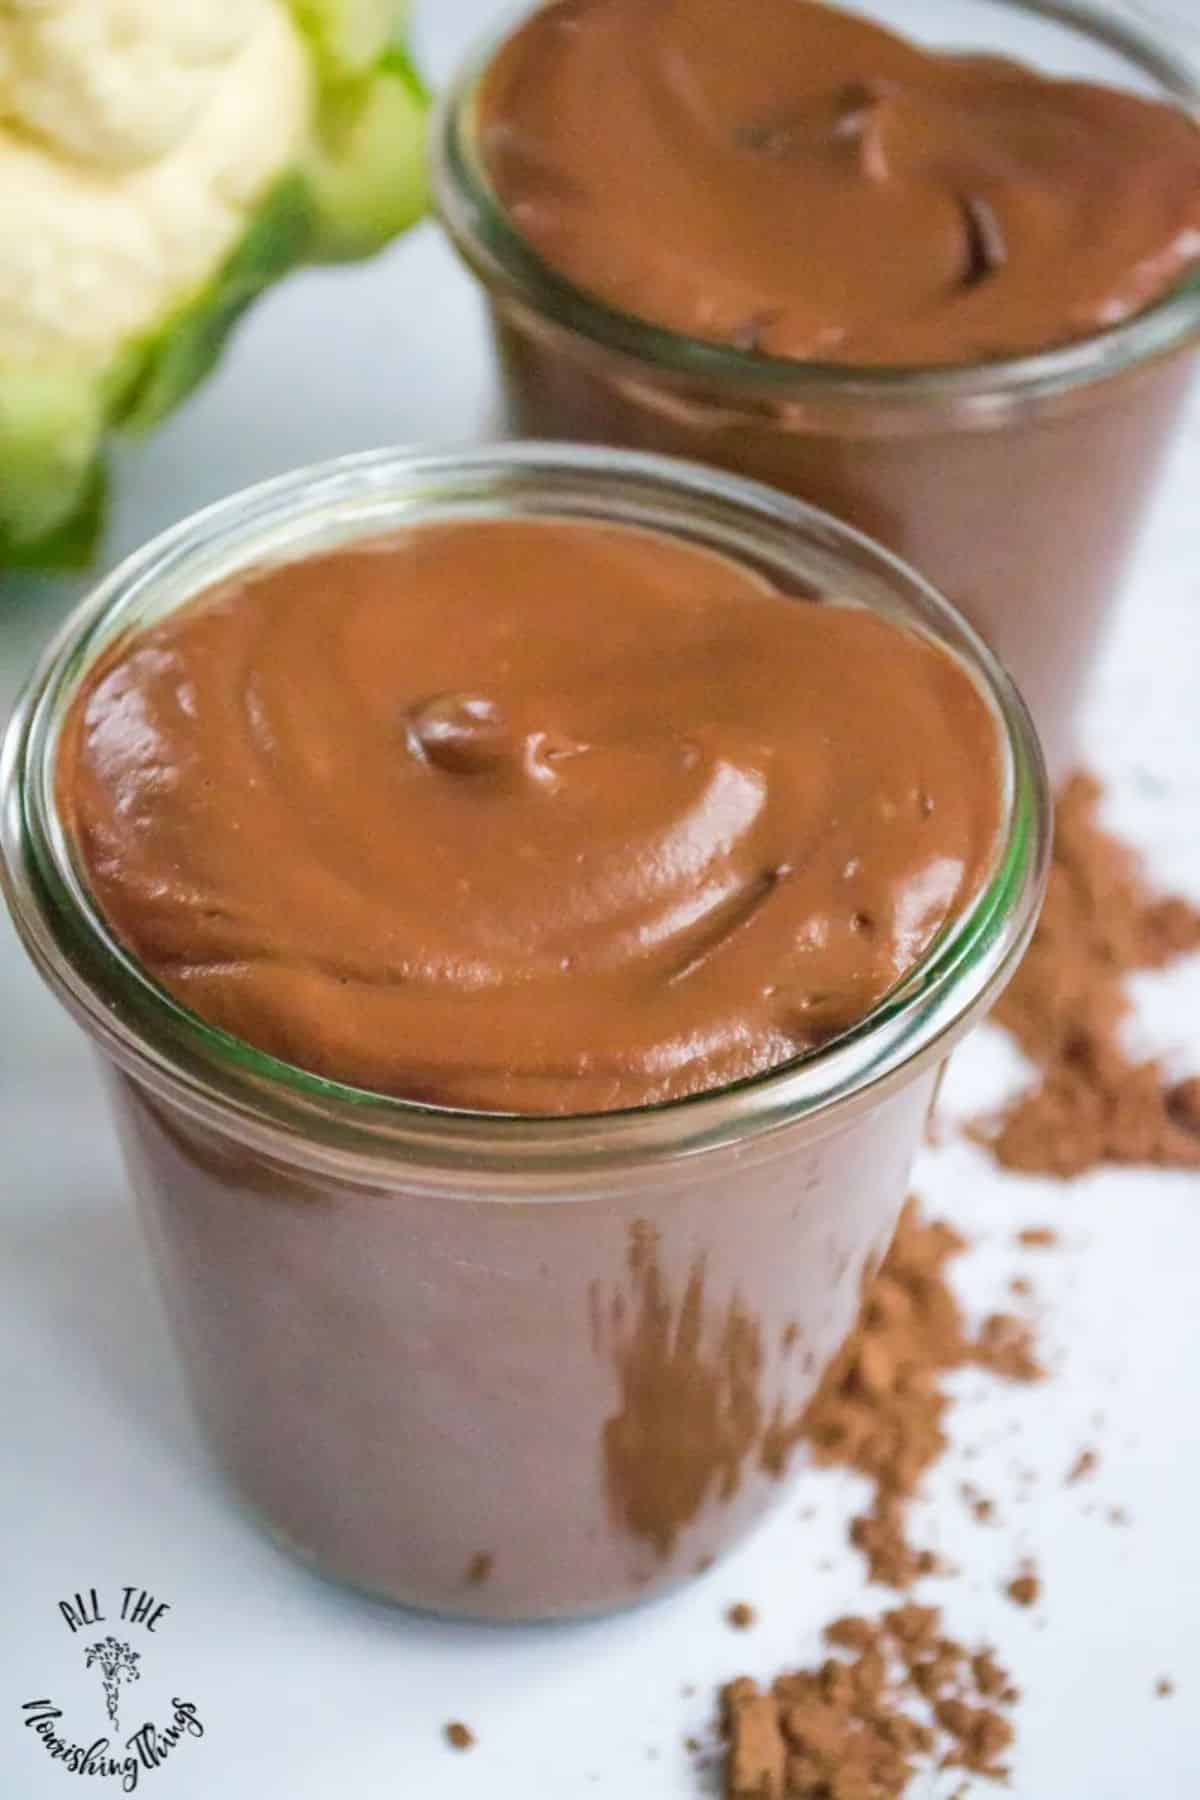 Mouth-watering Cauliflower Chocolate Pudding in glass cups.